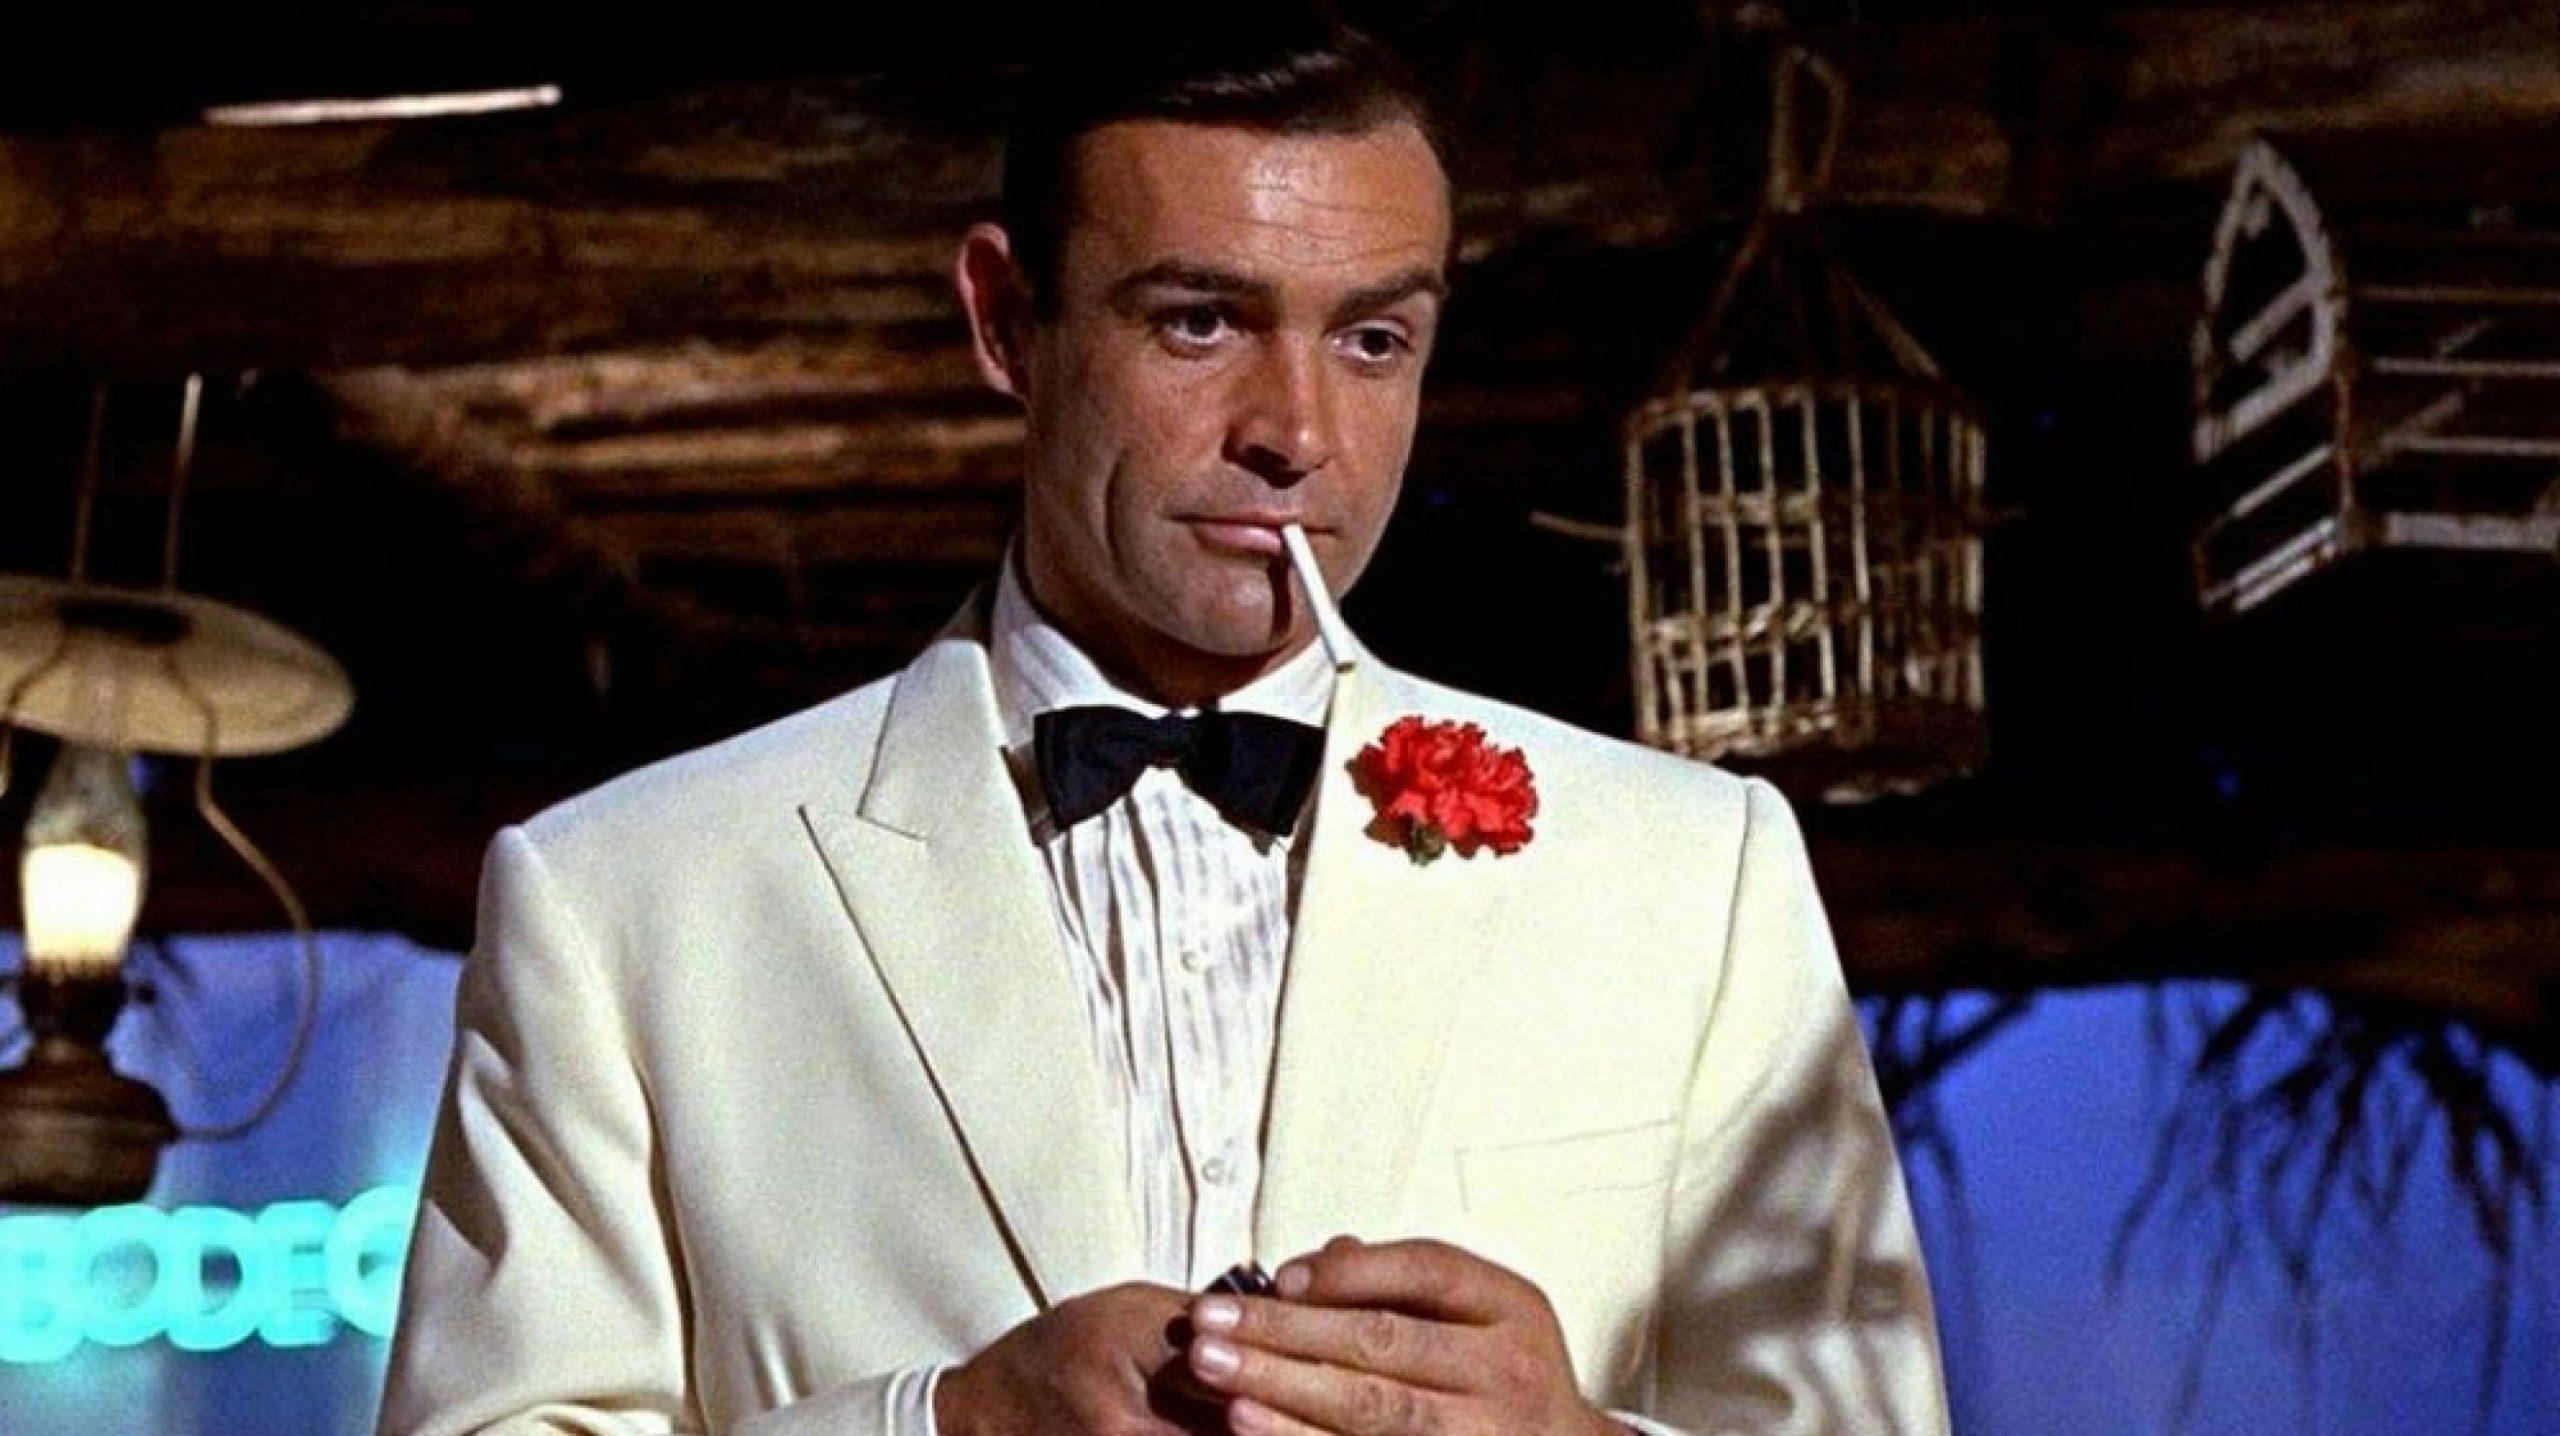 Sean Connery in "Dr No"